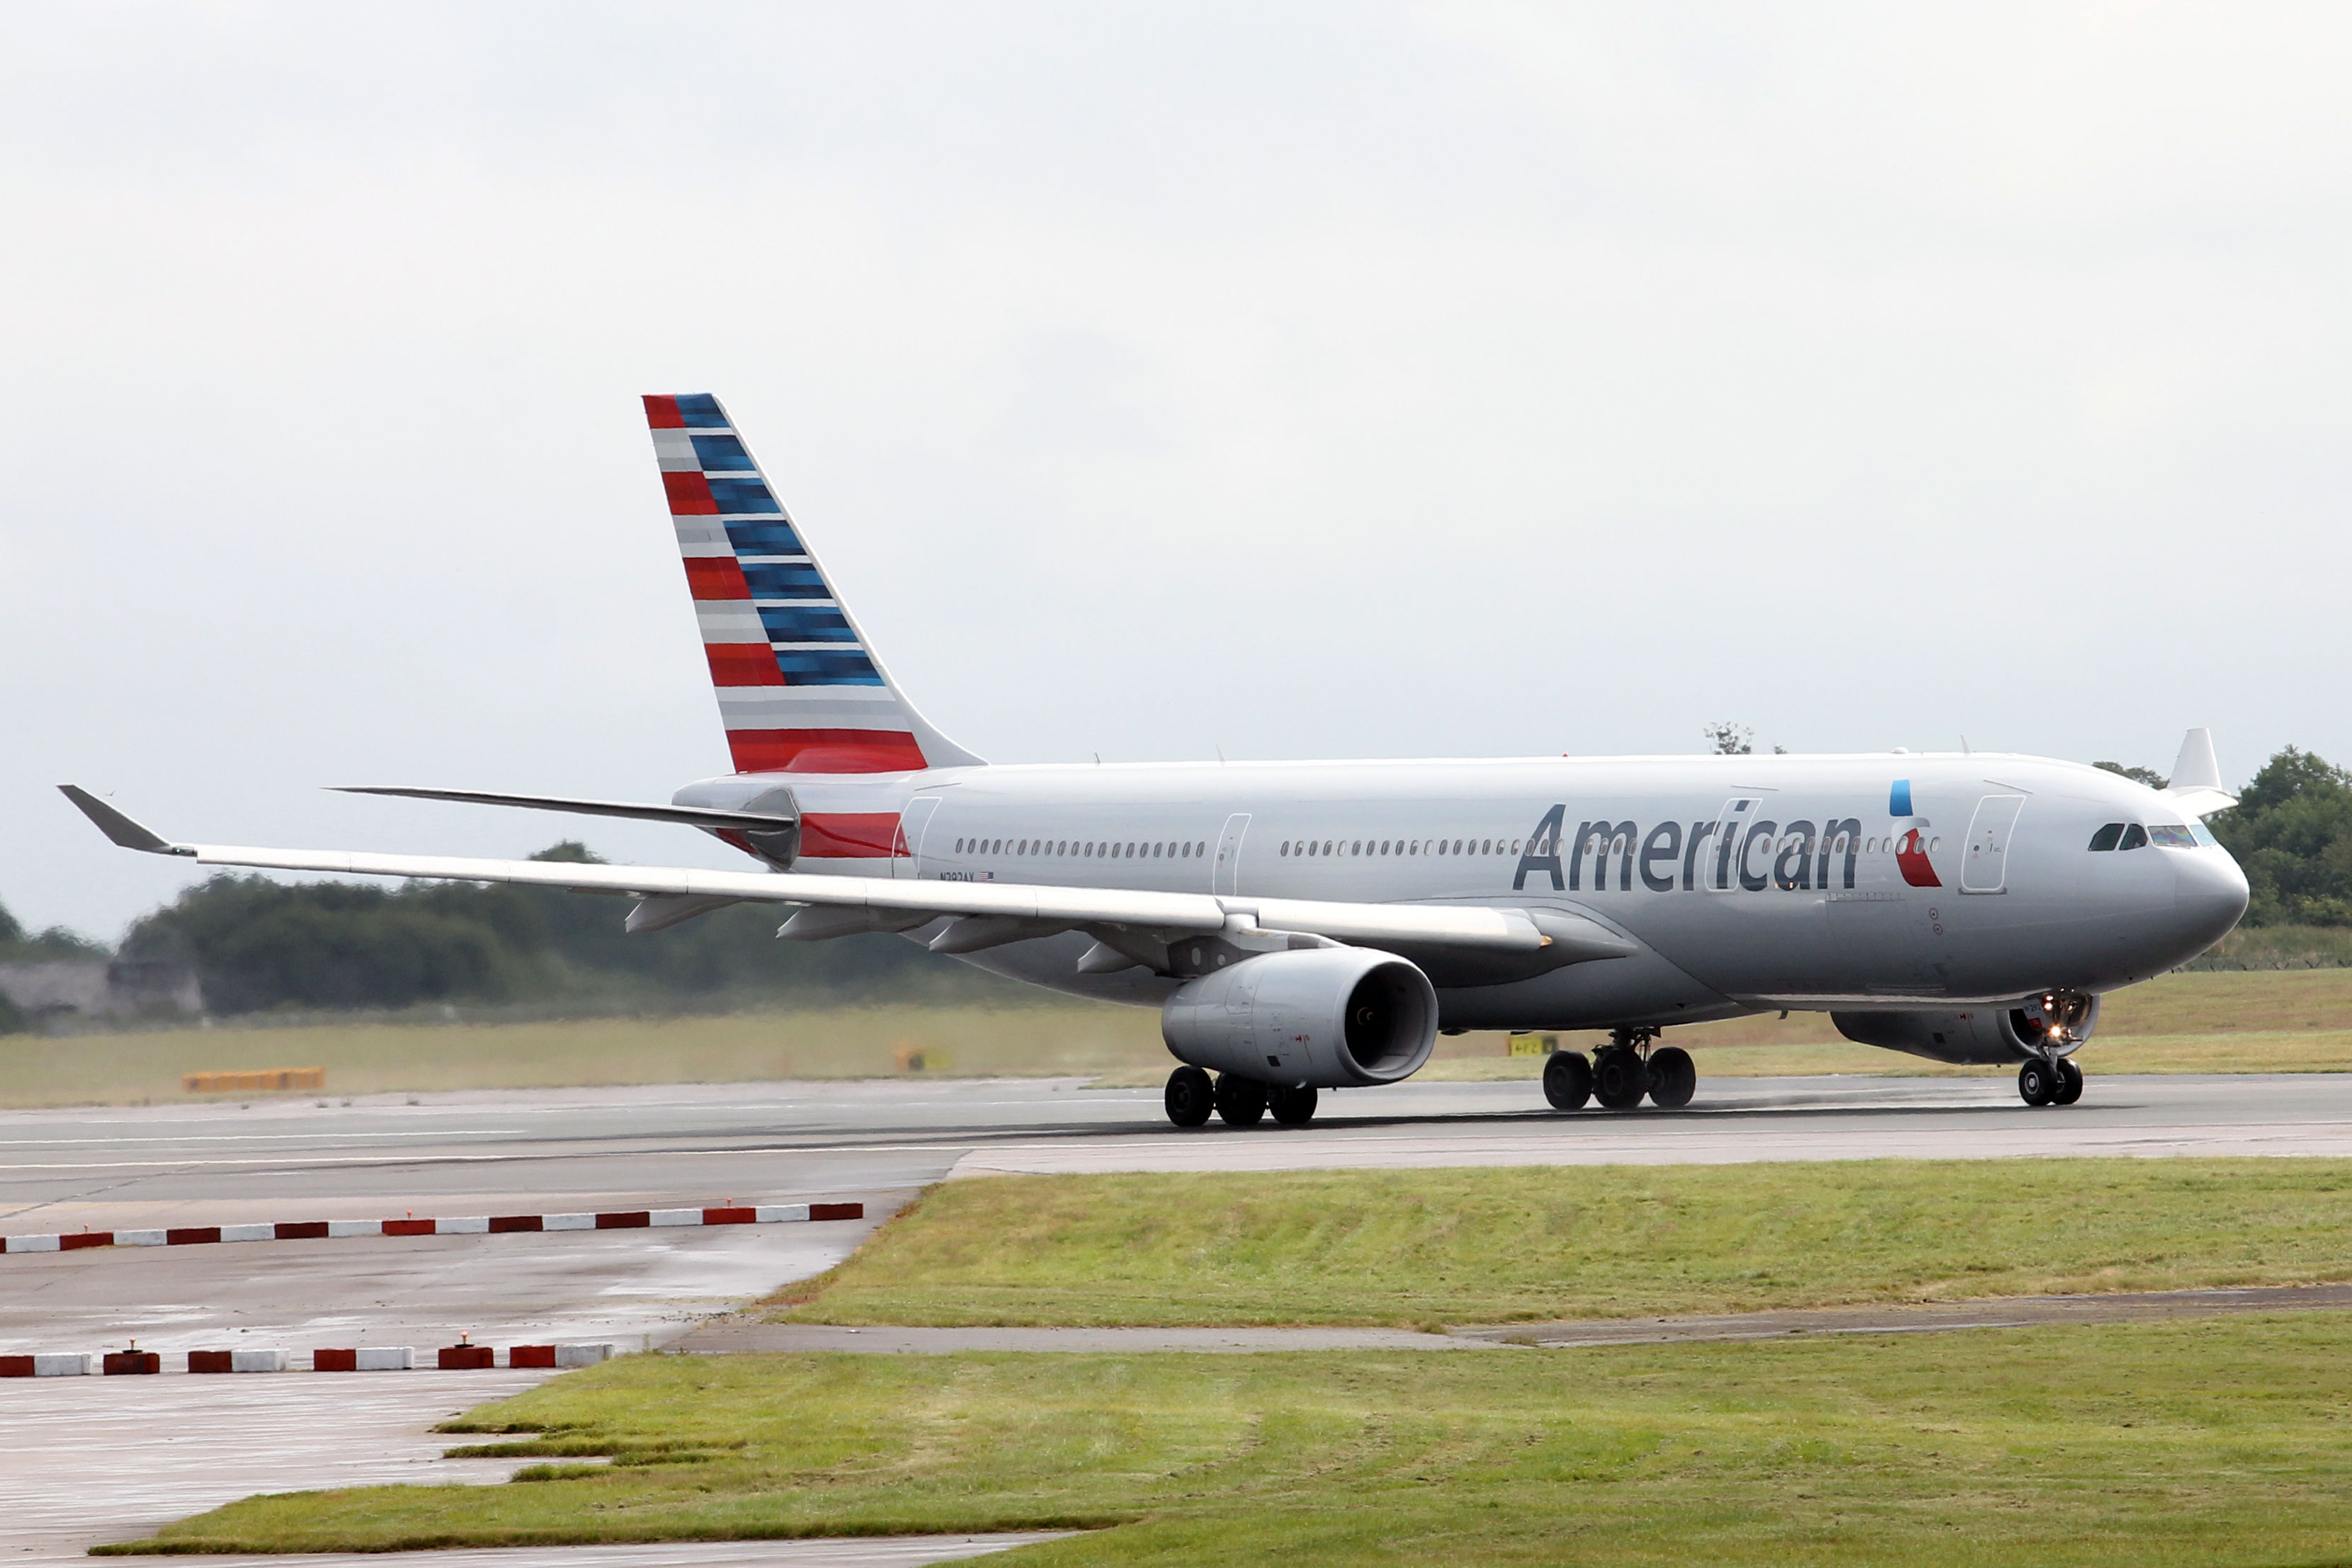 American Airlines A330